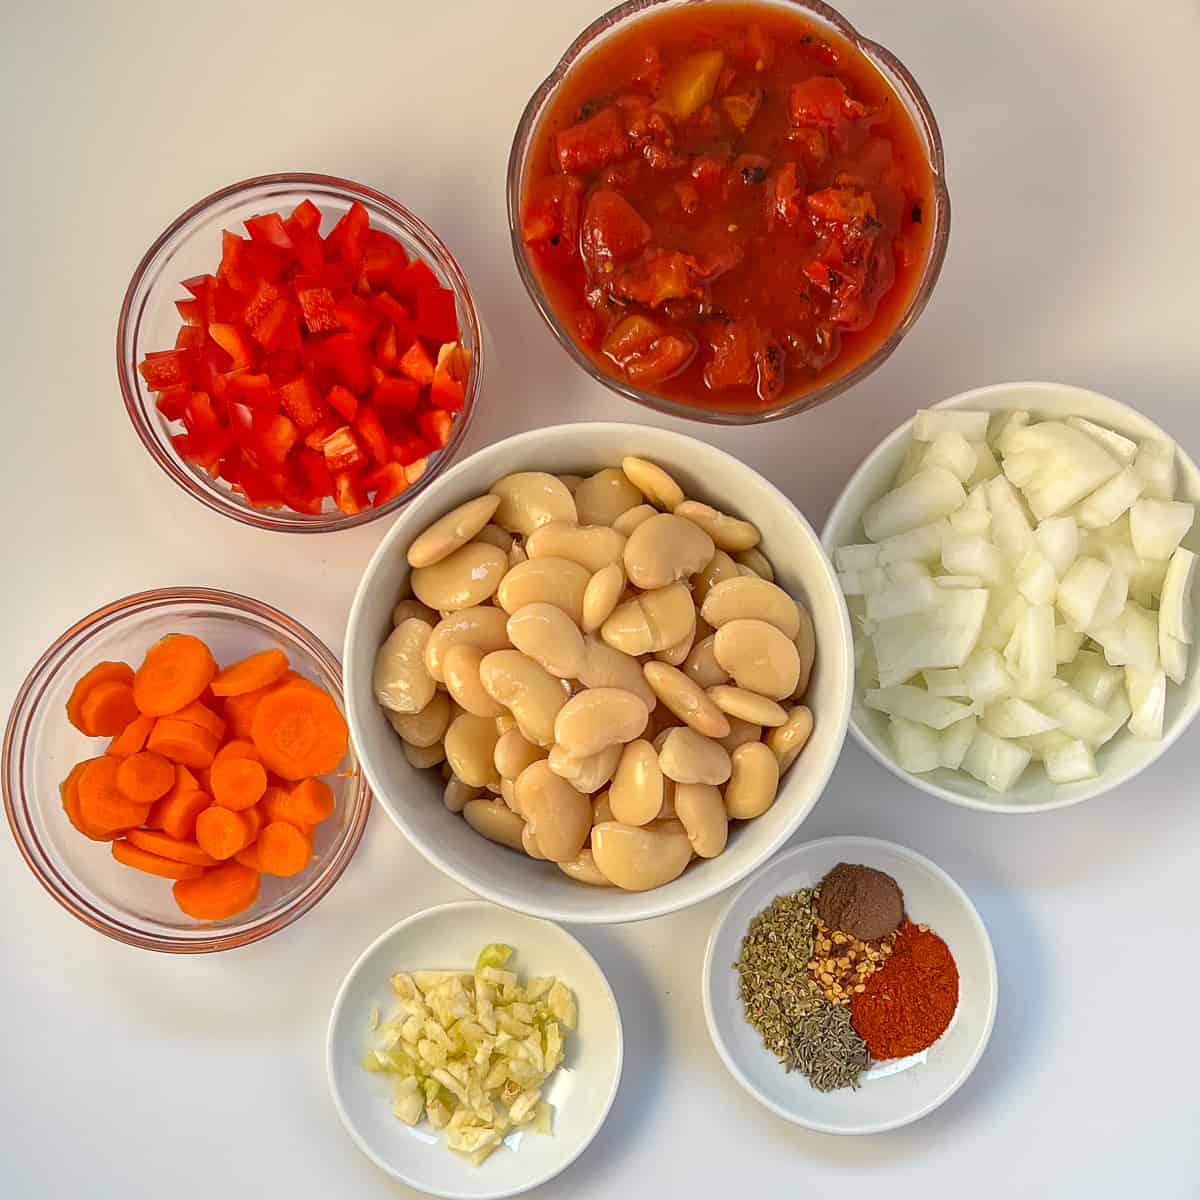 The ingredients for butter bean stew: butter beans, carrots, onion, bell pepper, garlic, diced tomatoes and spices.